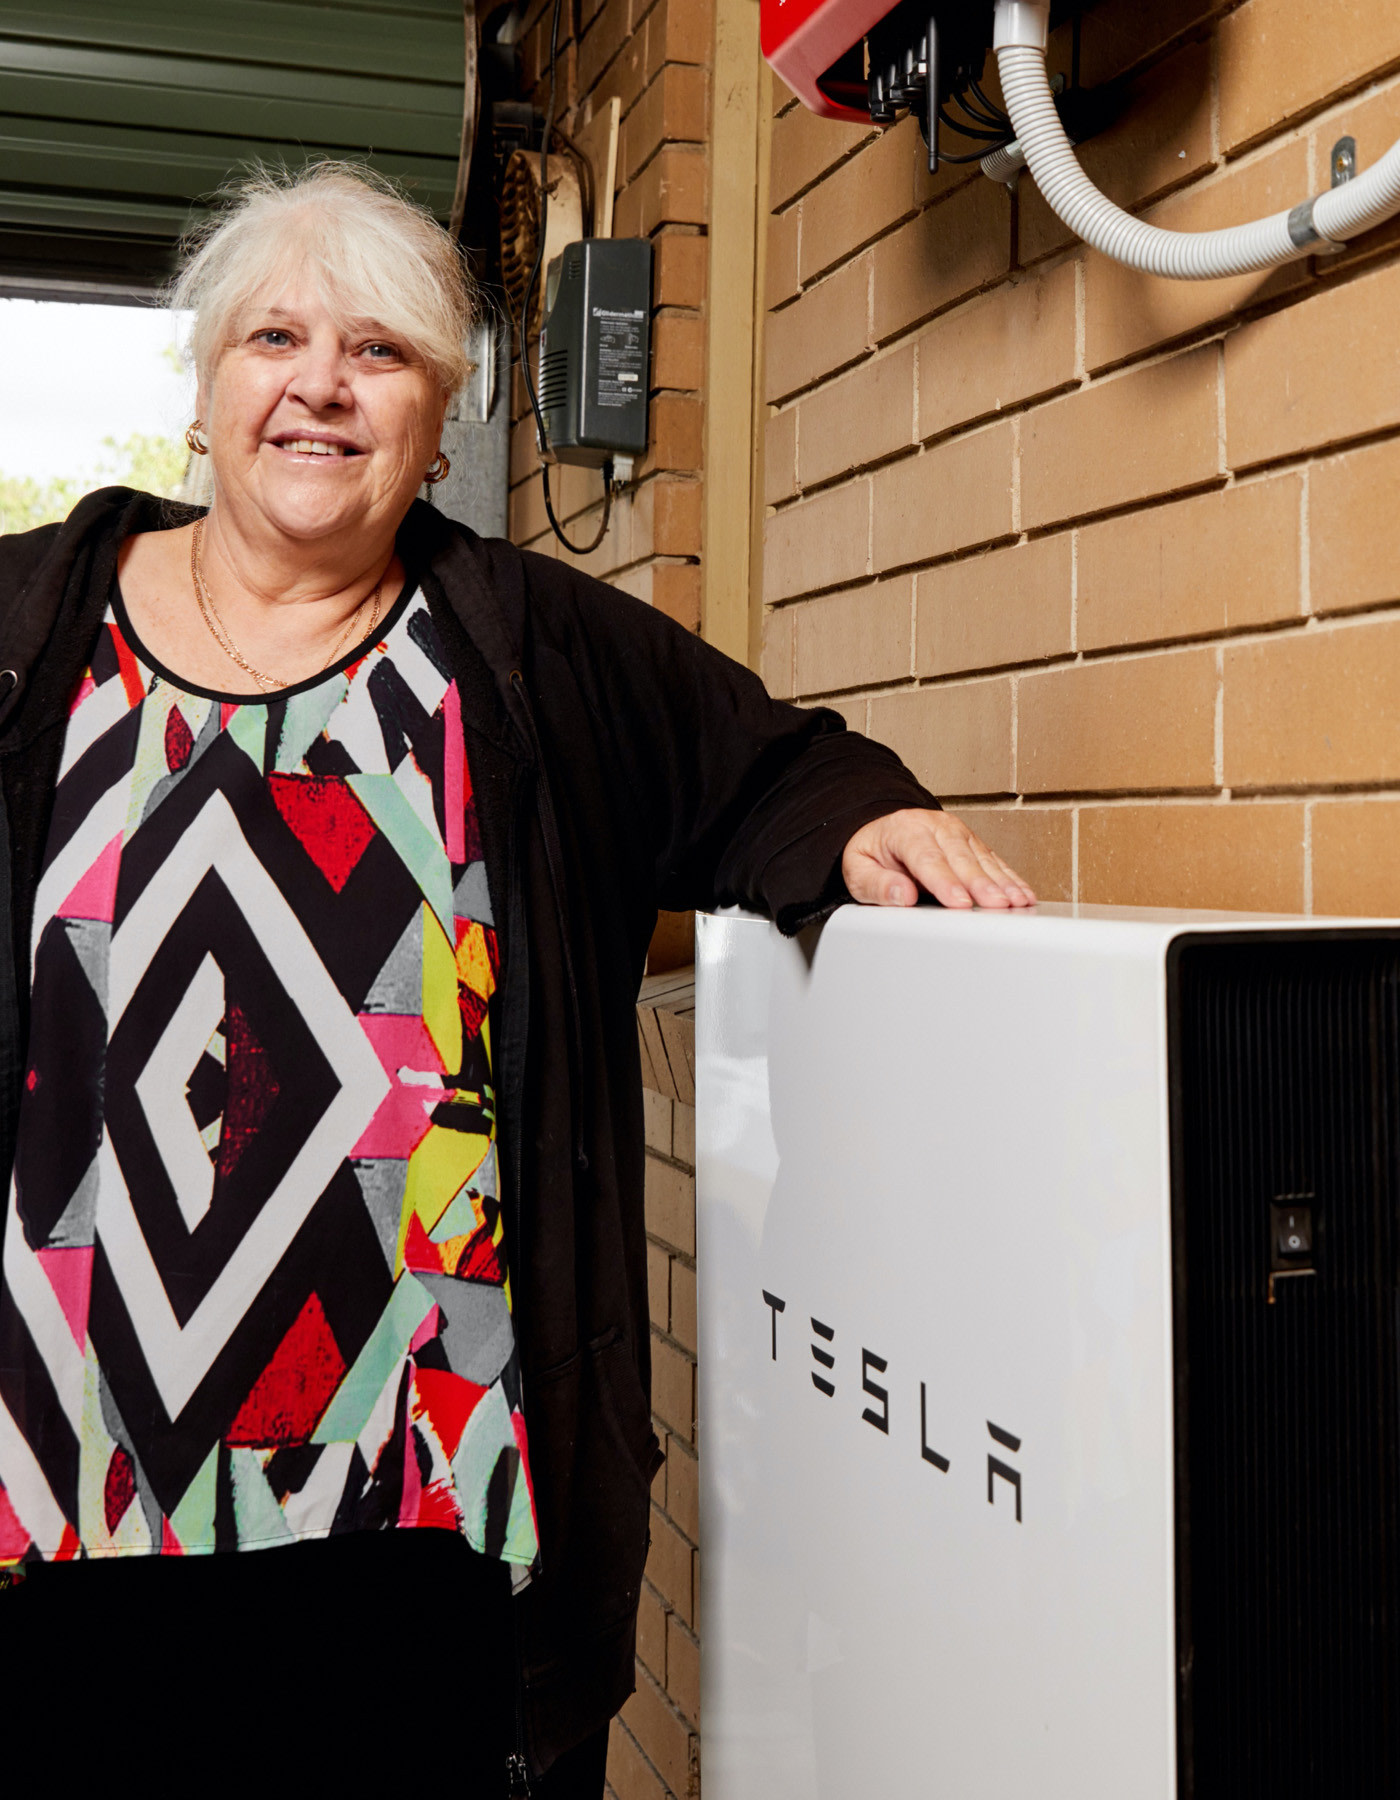 A customer of South Australia Virtual Power Plant standing next to Powerwall